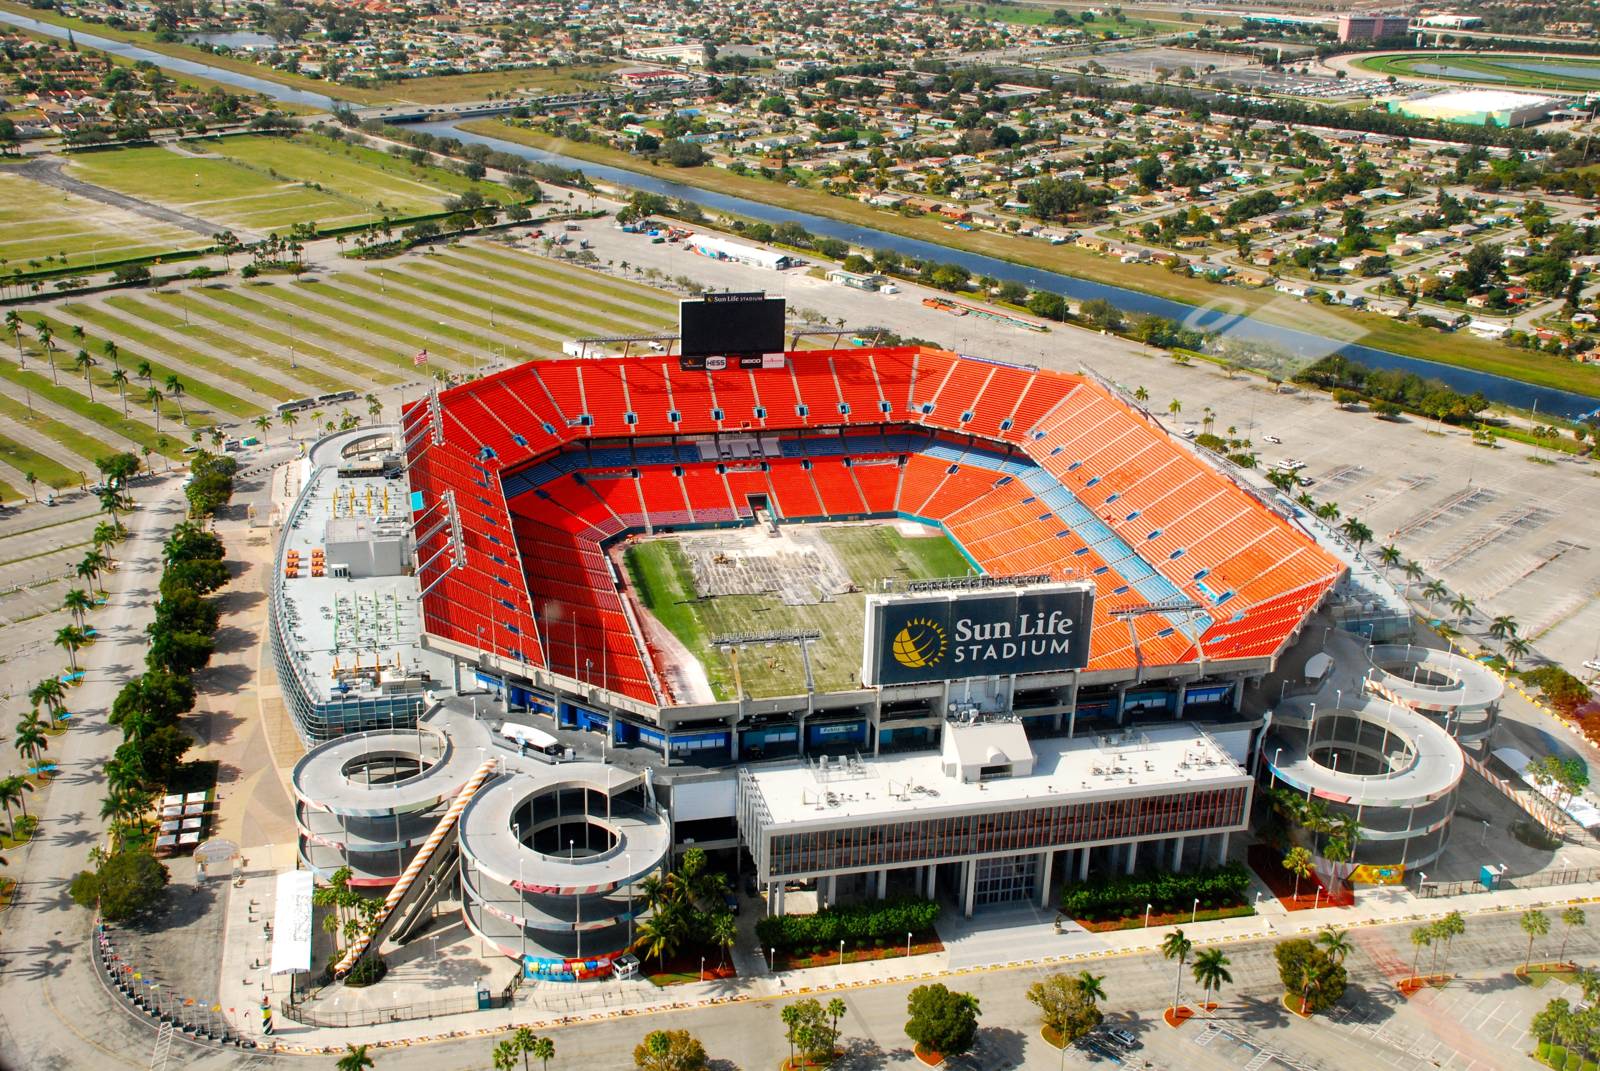 Dolphins CEO Tom Garfinkel pushes Hard Rock Stadium as possible 2026 World  Cup final host